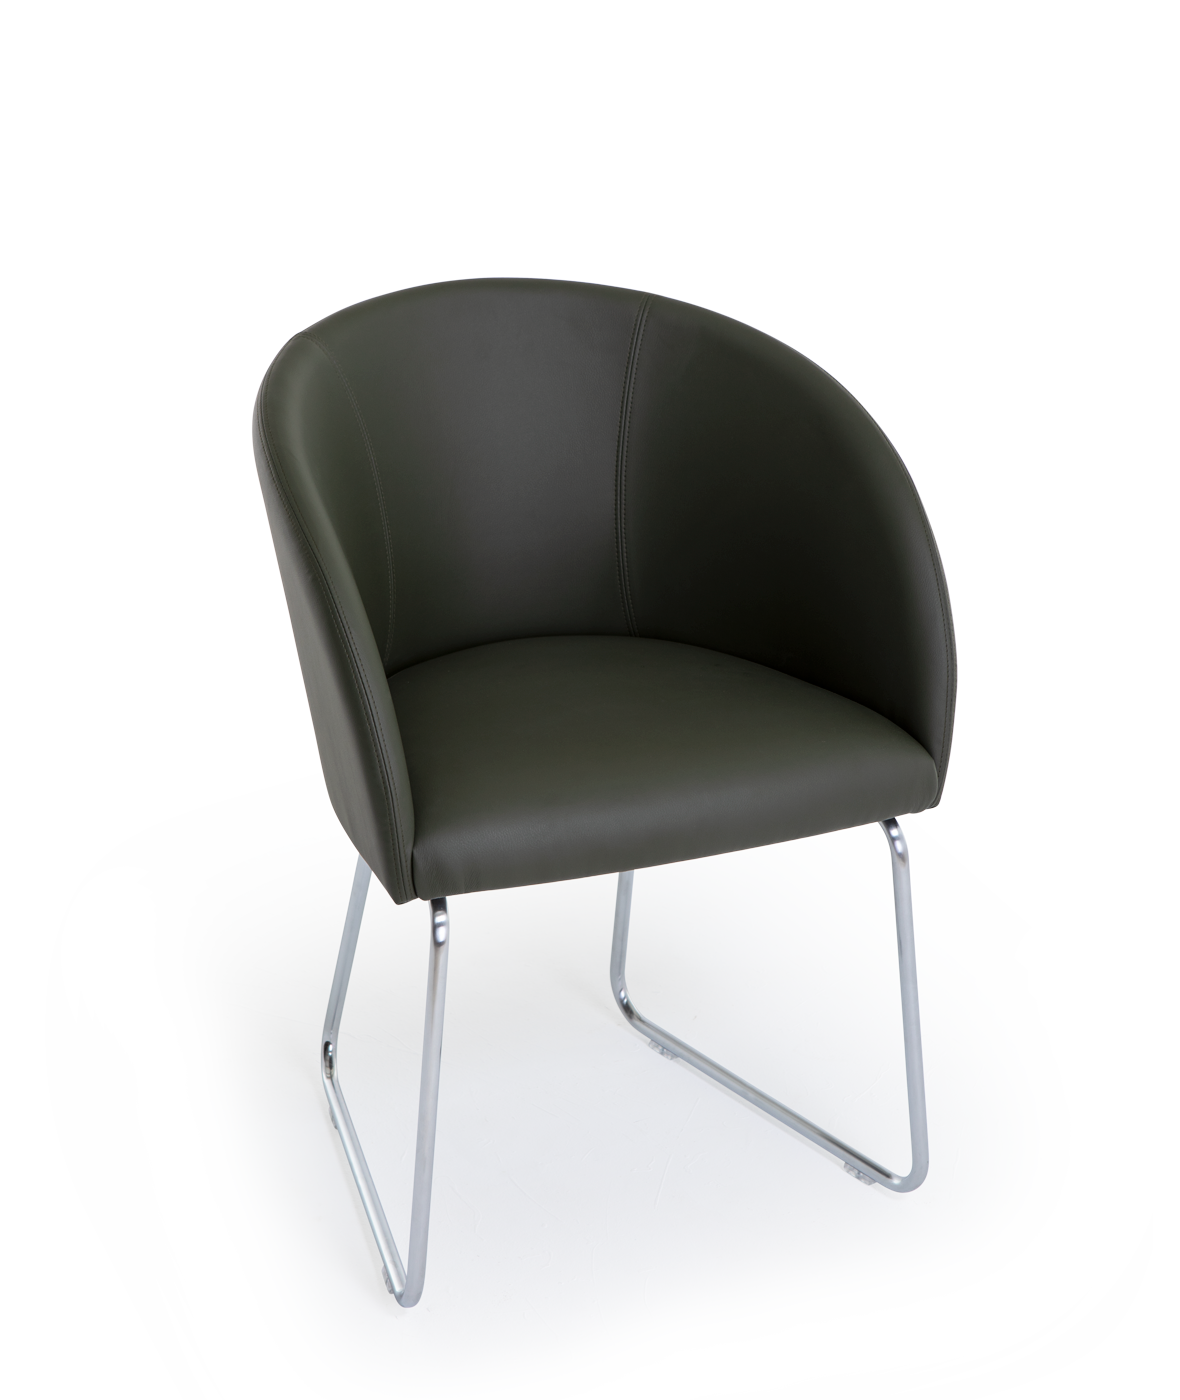 Cistell Original chair with armrests and sled base - Vergés